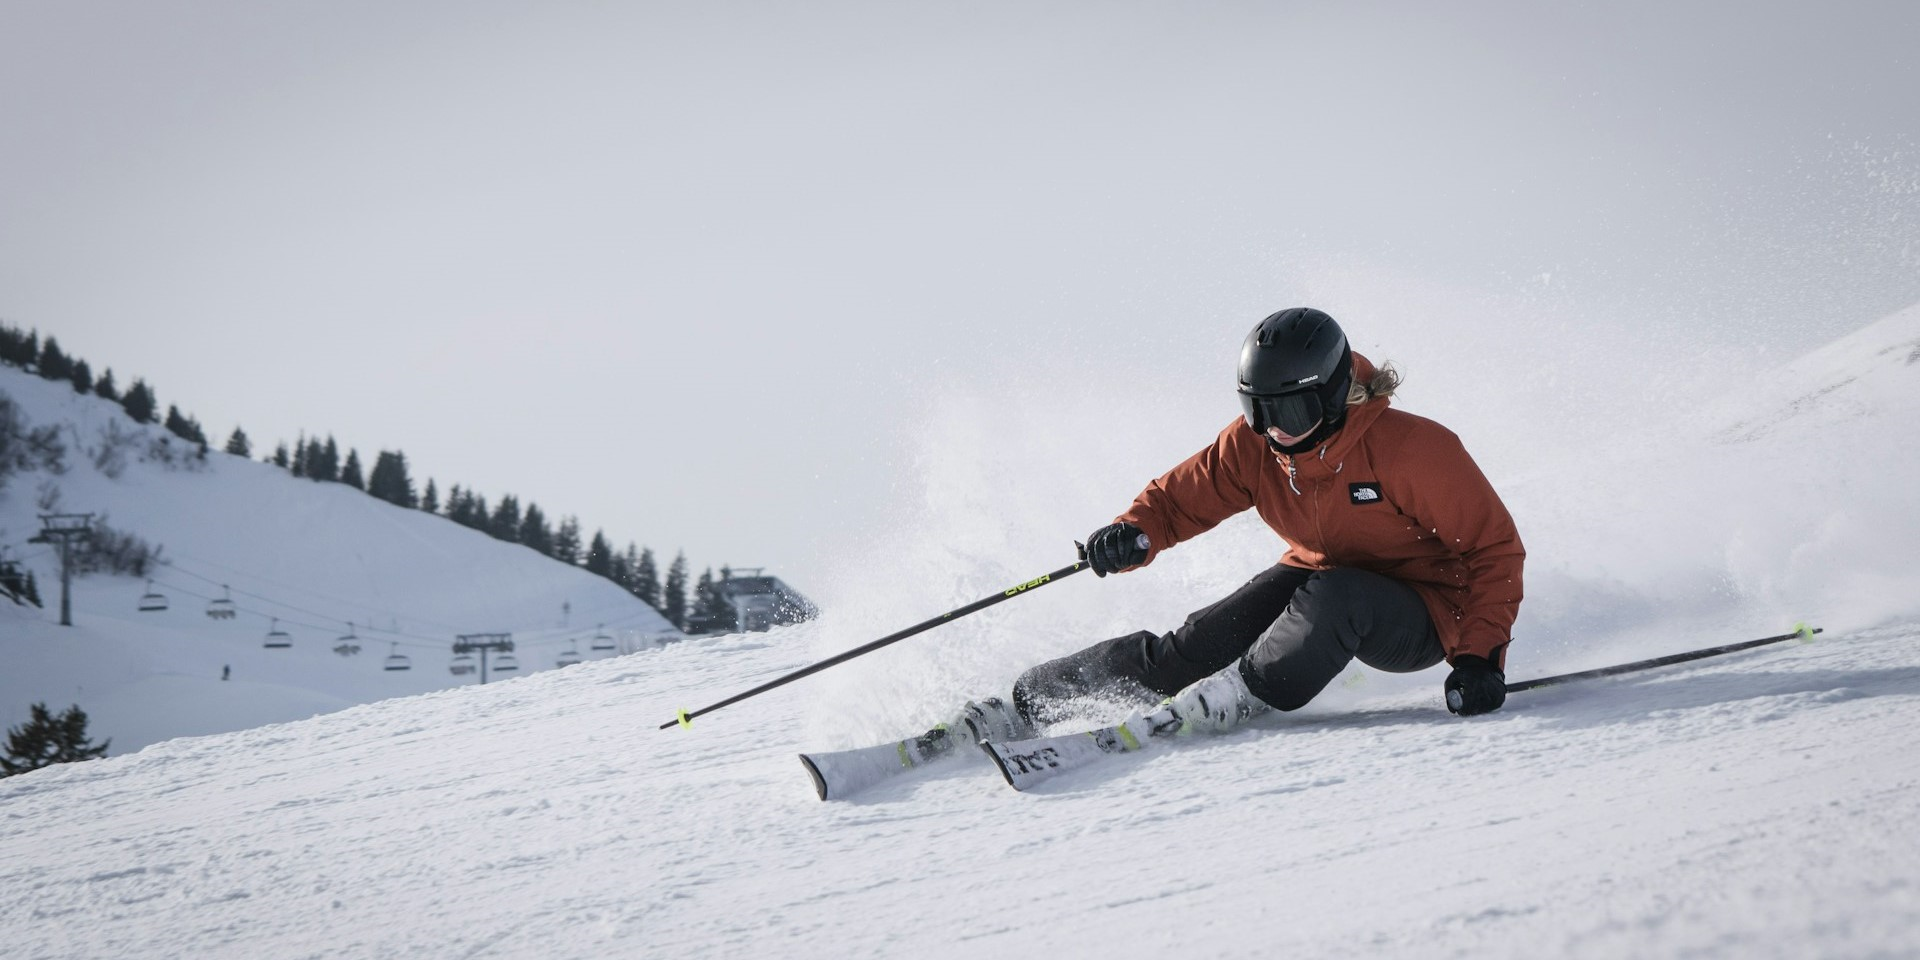 Carving the Slopes: The Artistry of Skiing